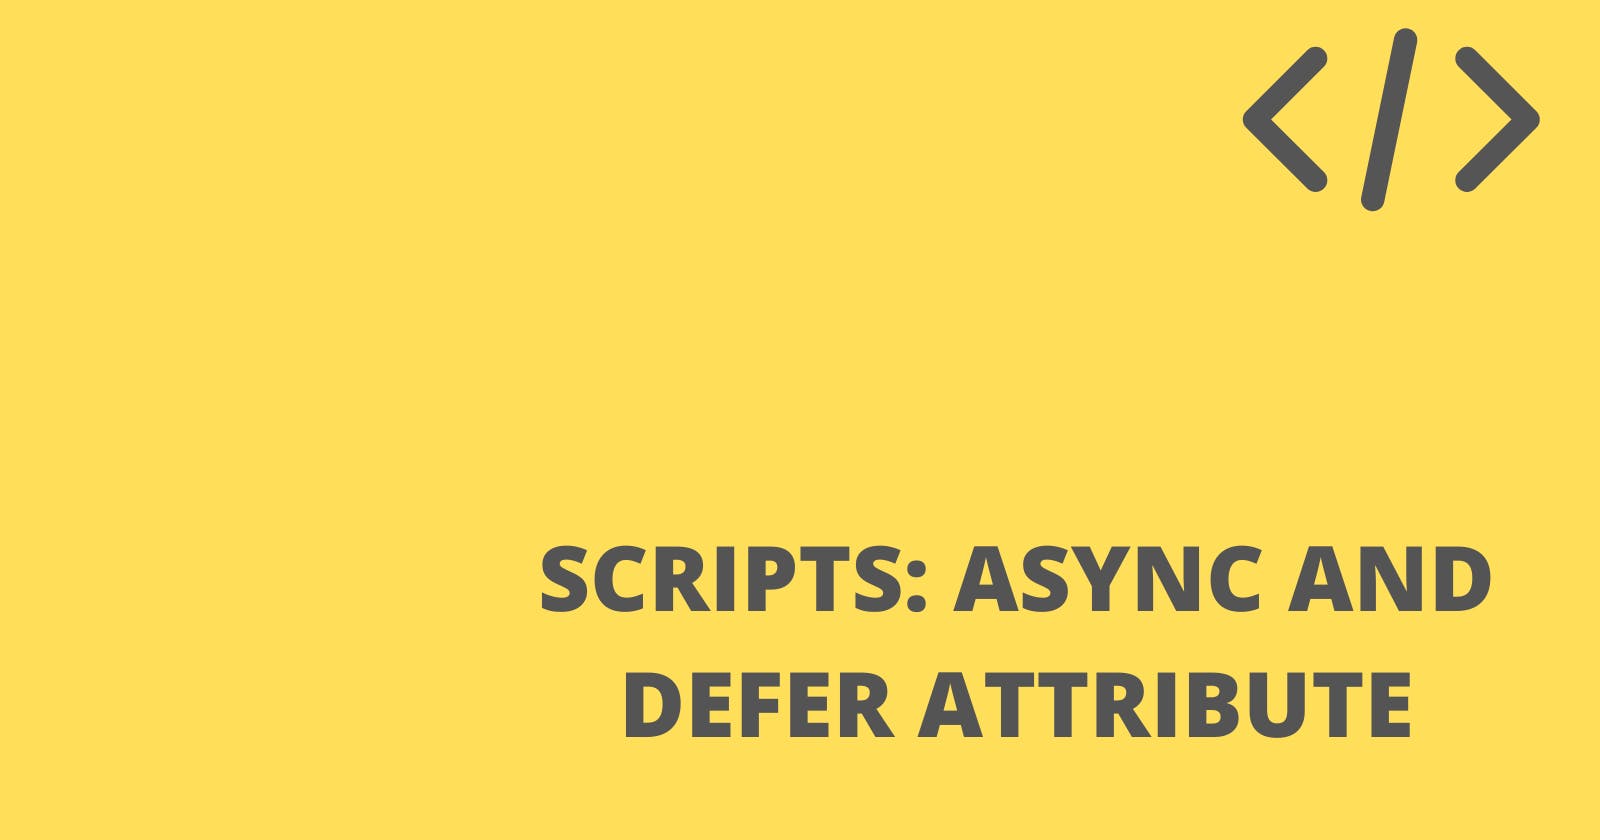 Understanding async and defer attribute